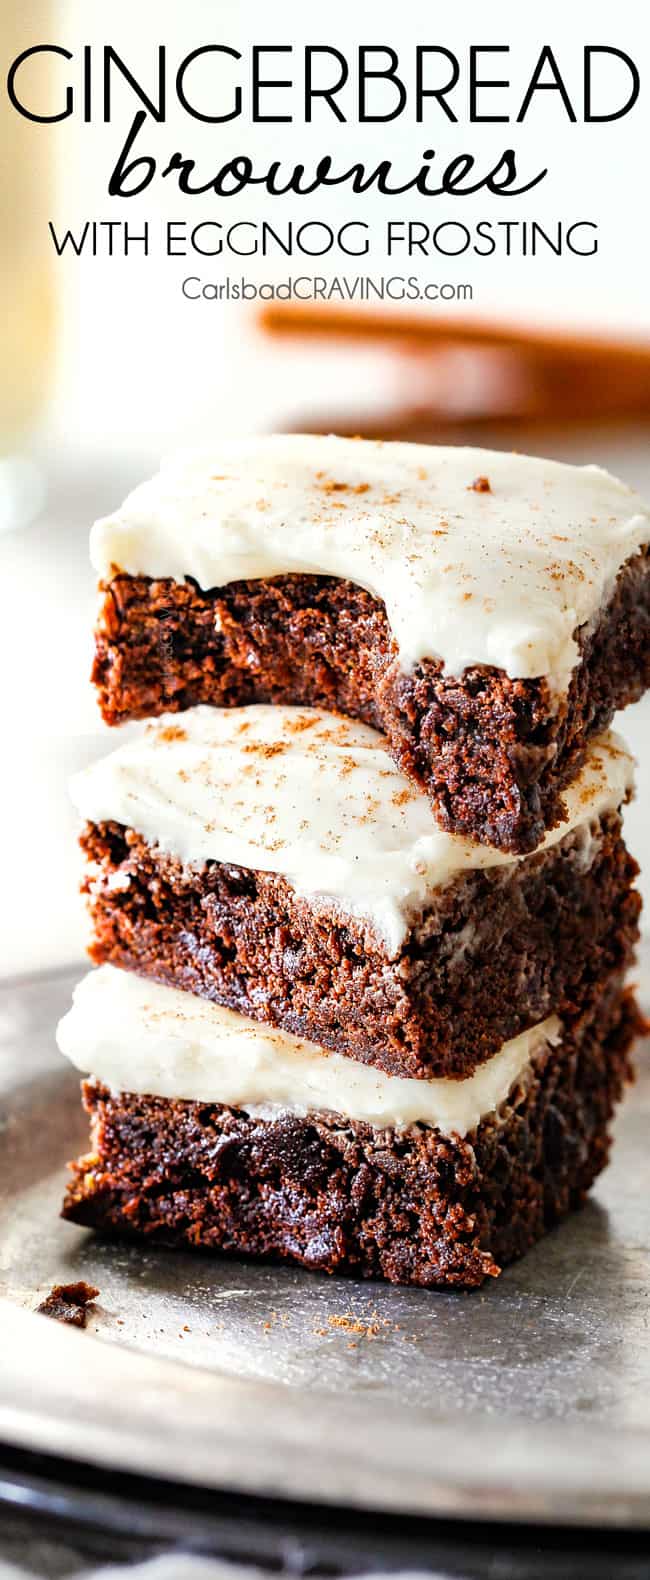 Soft and chewy Gingerbread Brownies are your favorite holiday cookie in rich chocolate brownie form all smothered in luscious Eggnog Cream Cheese Frosting!  These are destined to become a must make holiday favorite and so much easier than rolling/baking individual cookies! 